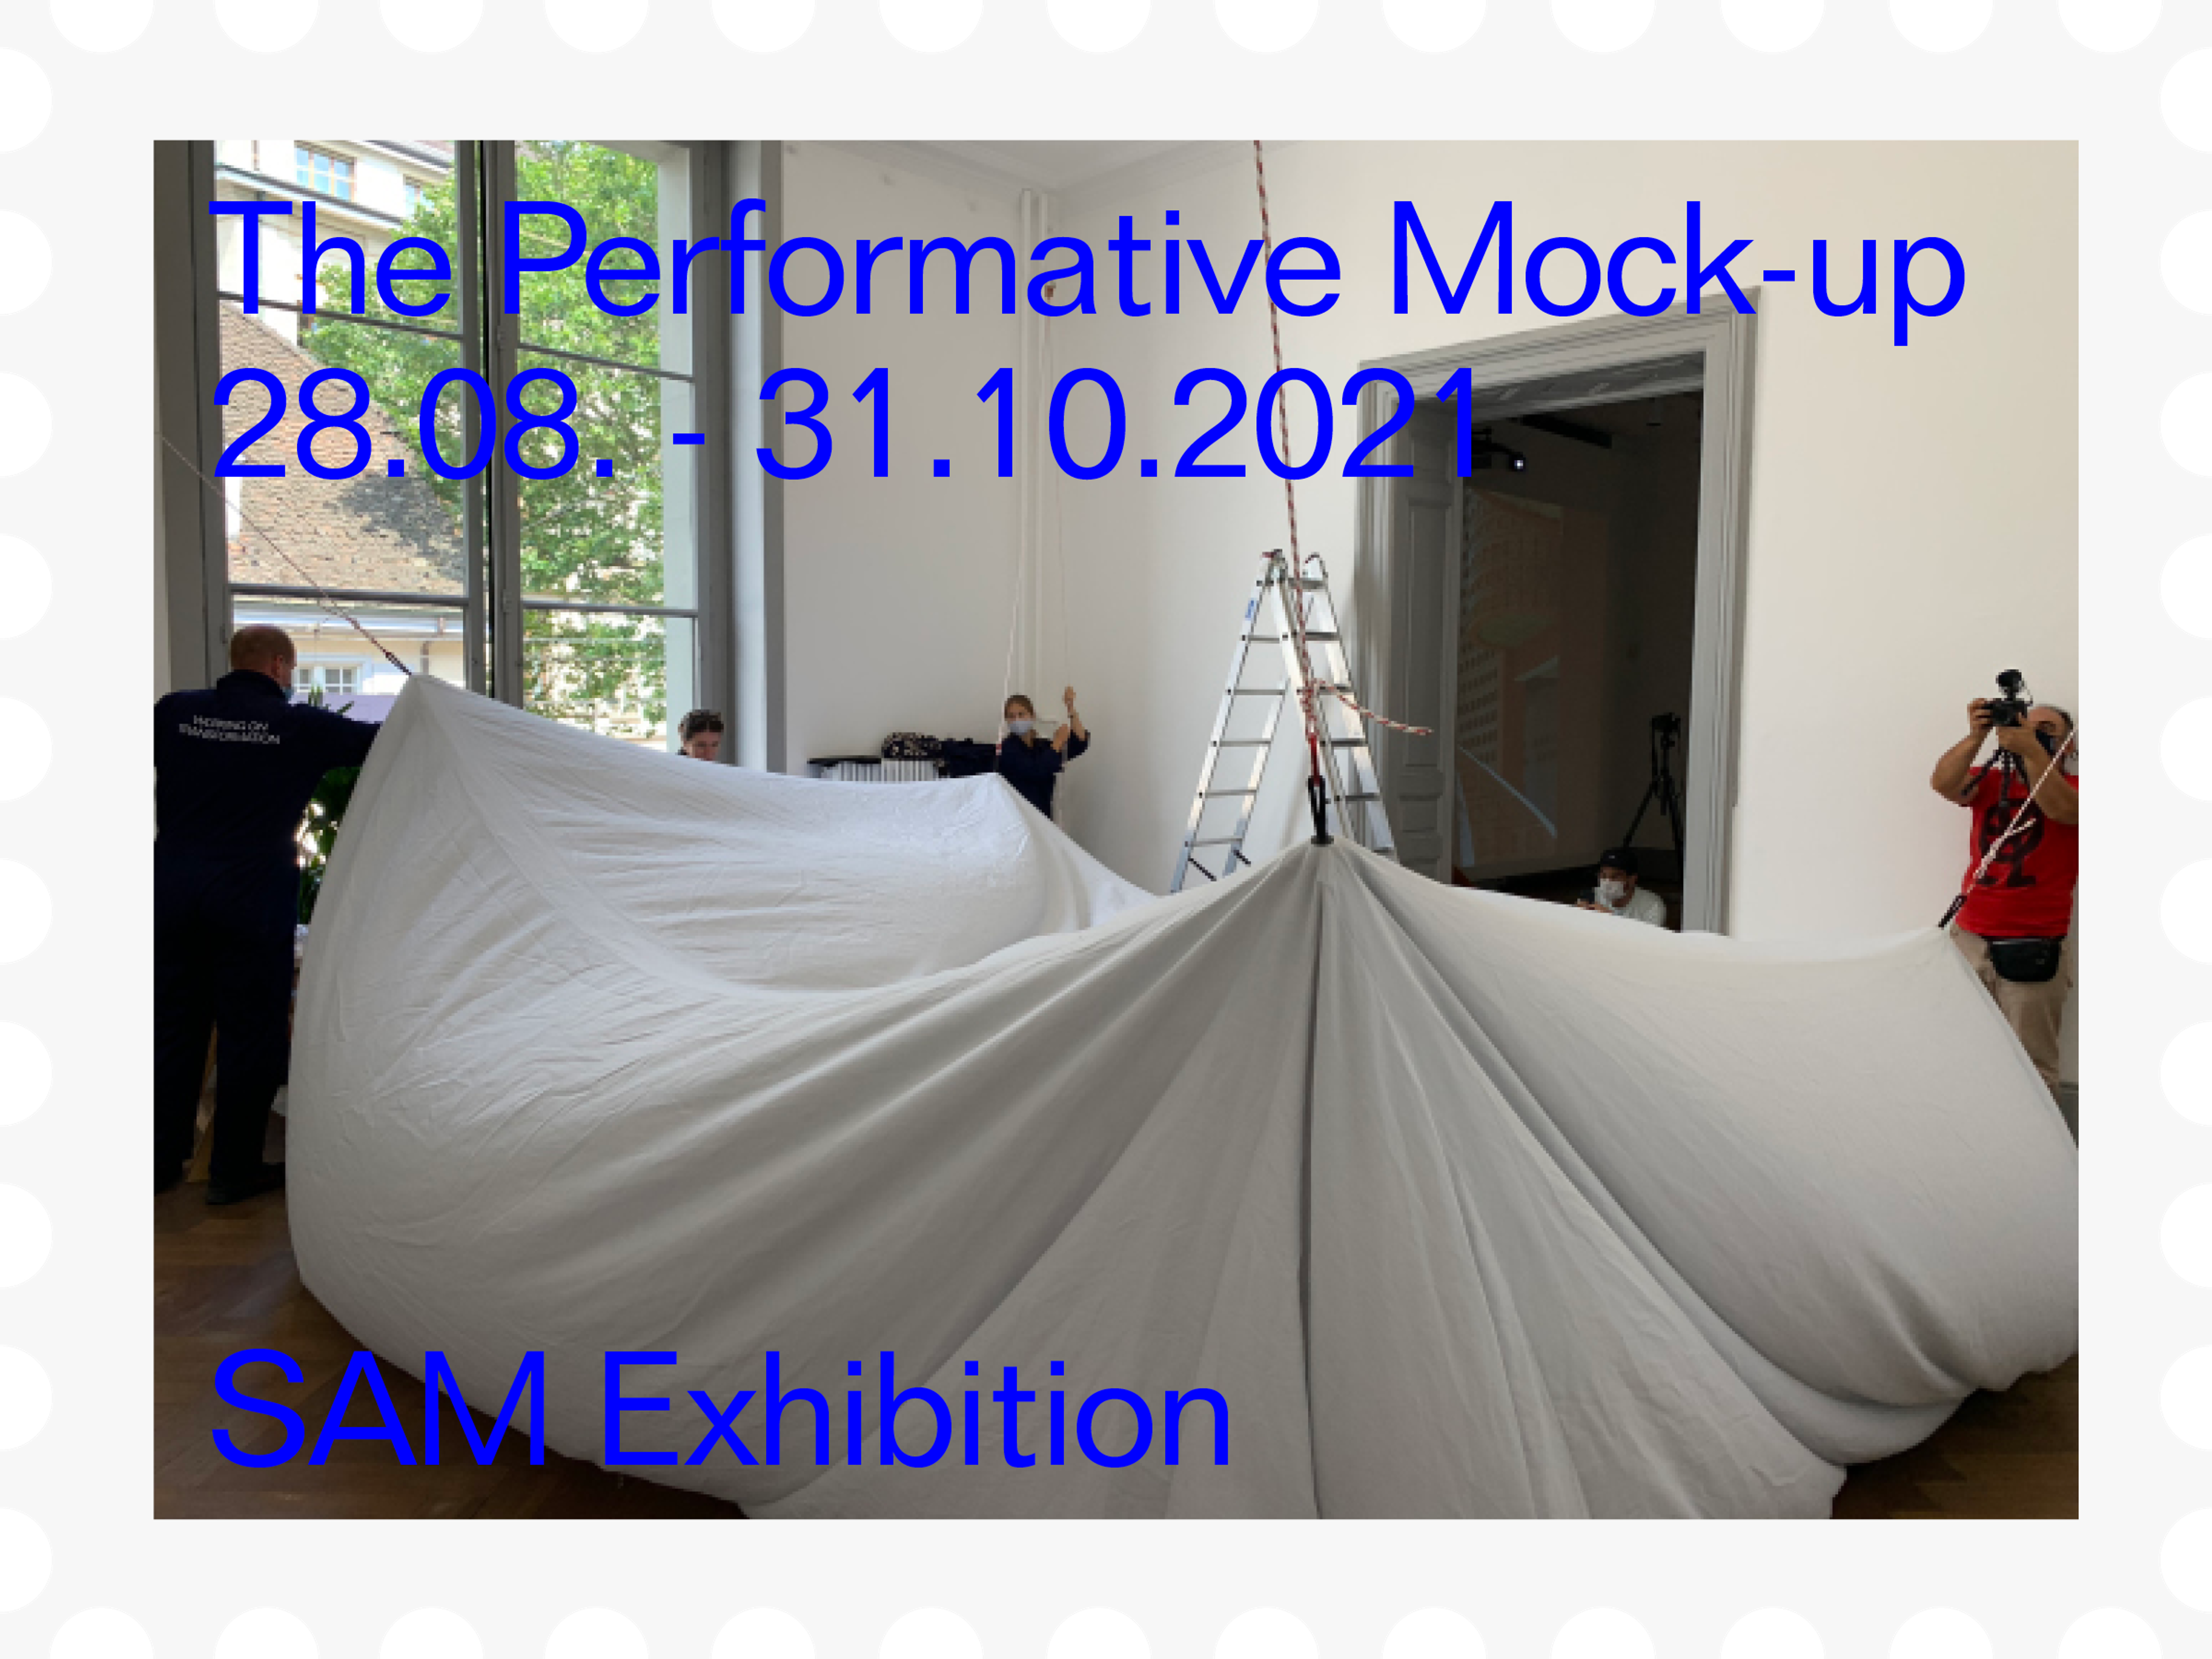 Exhibition: The Performative Mock-up